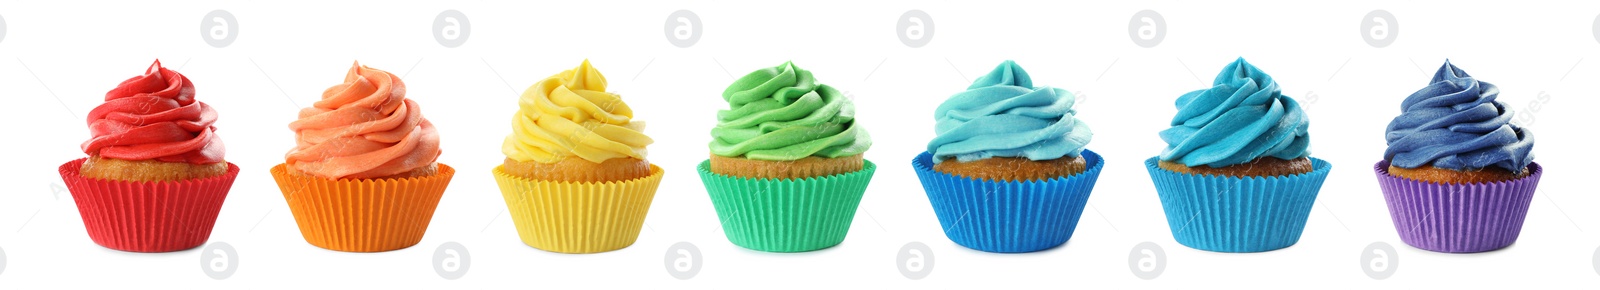 Image of Set of delicious birthday cupcakes on white background. Banner design